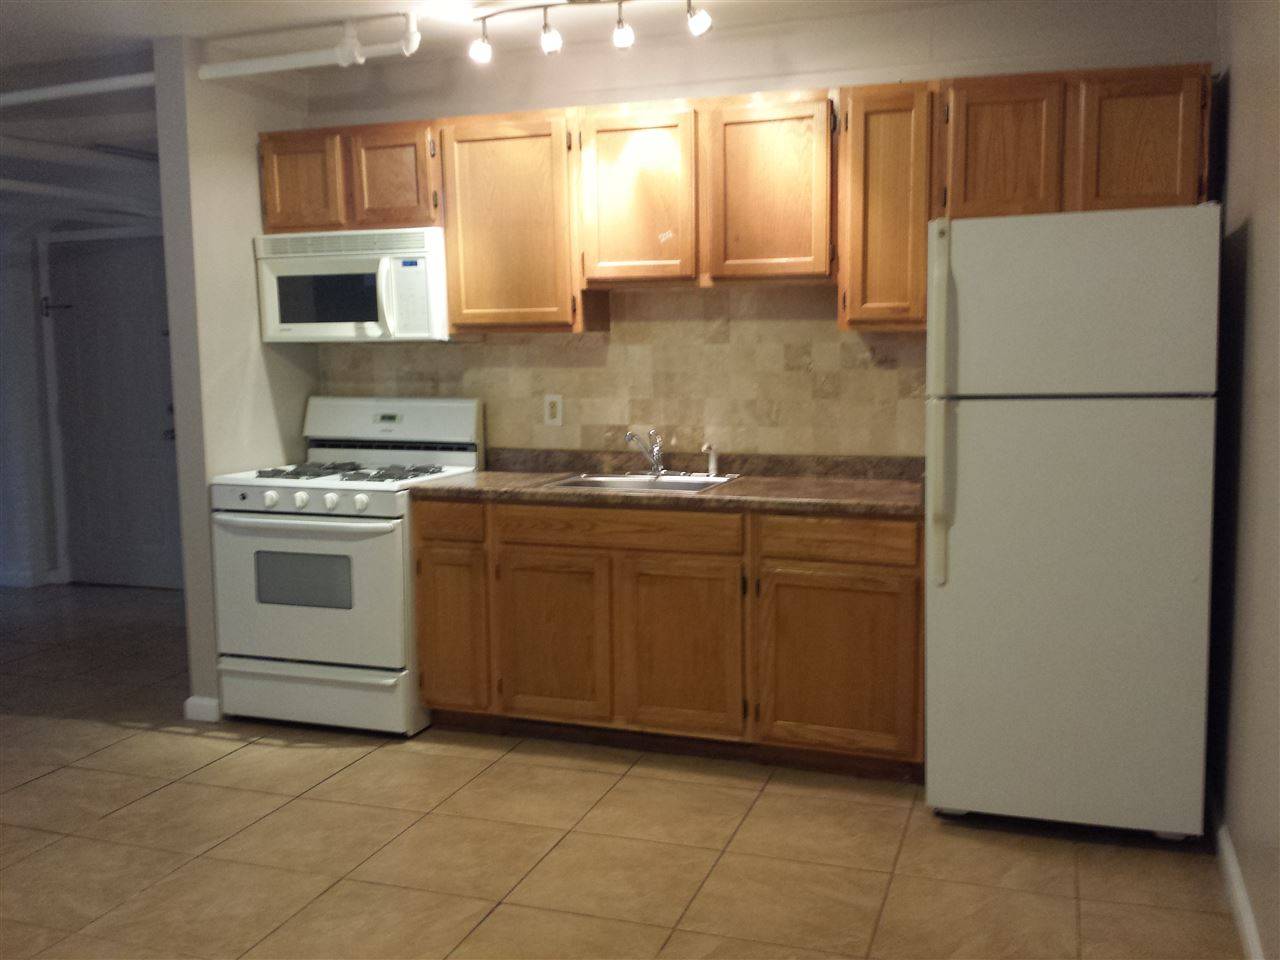 RENT INCLUDE HEAT & HOT WATER - 2 BR New Jersey